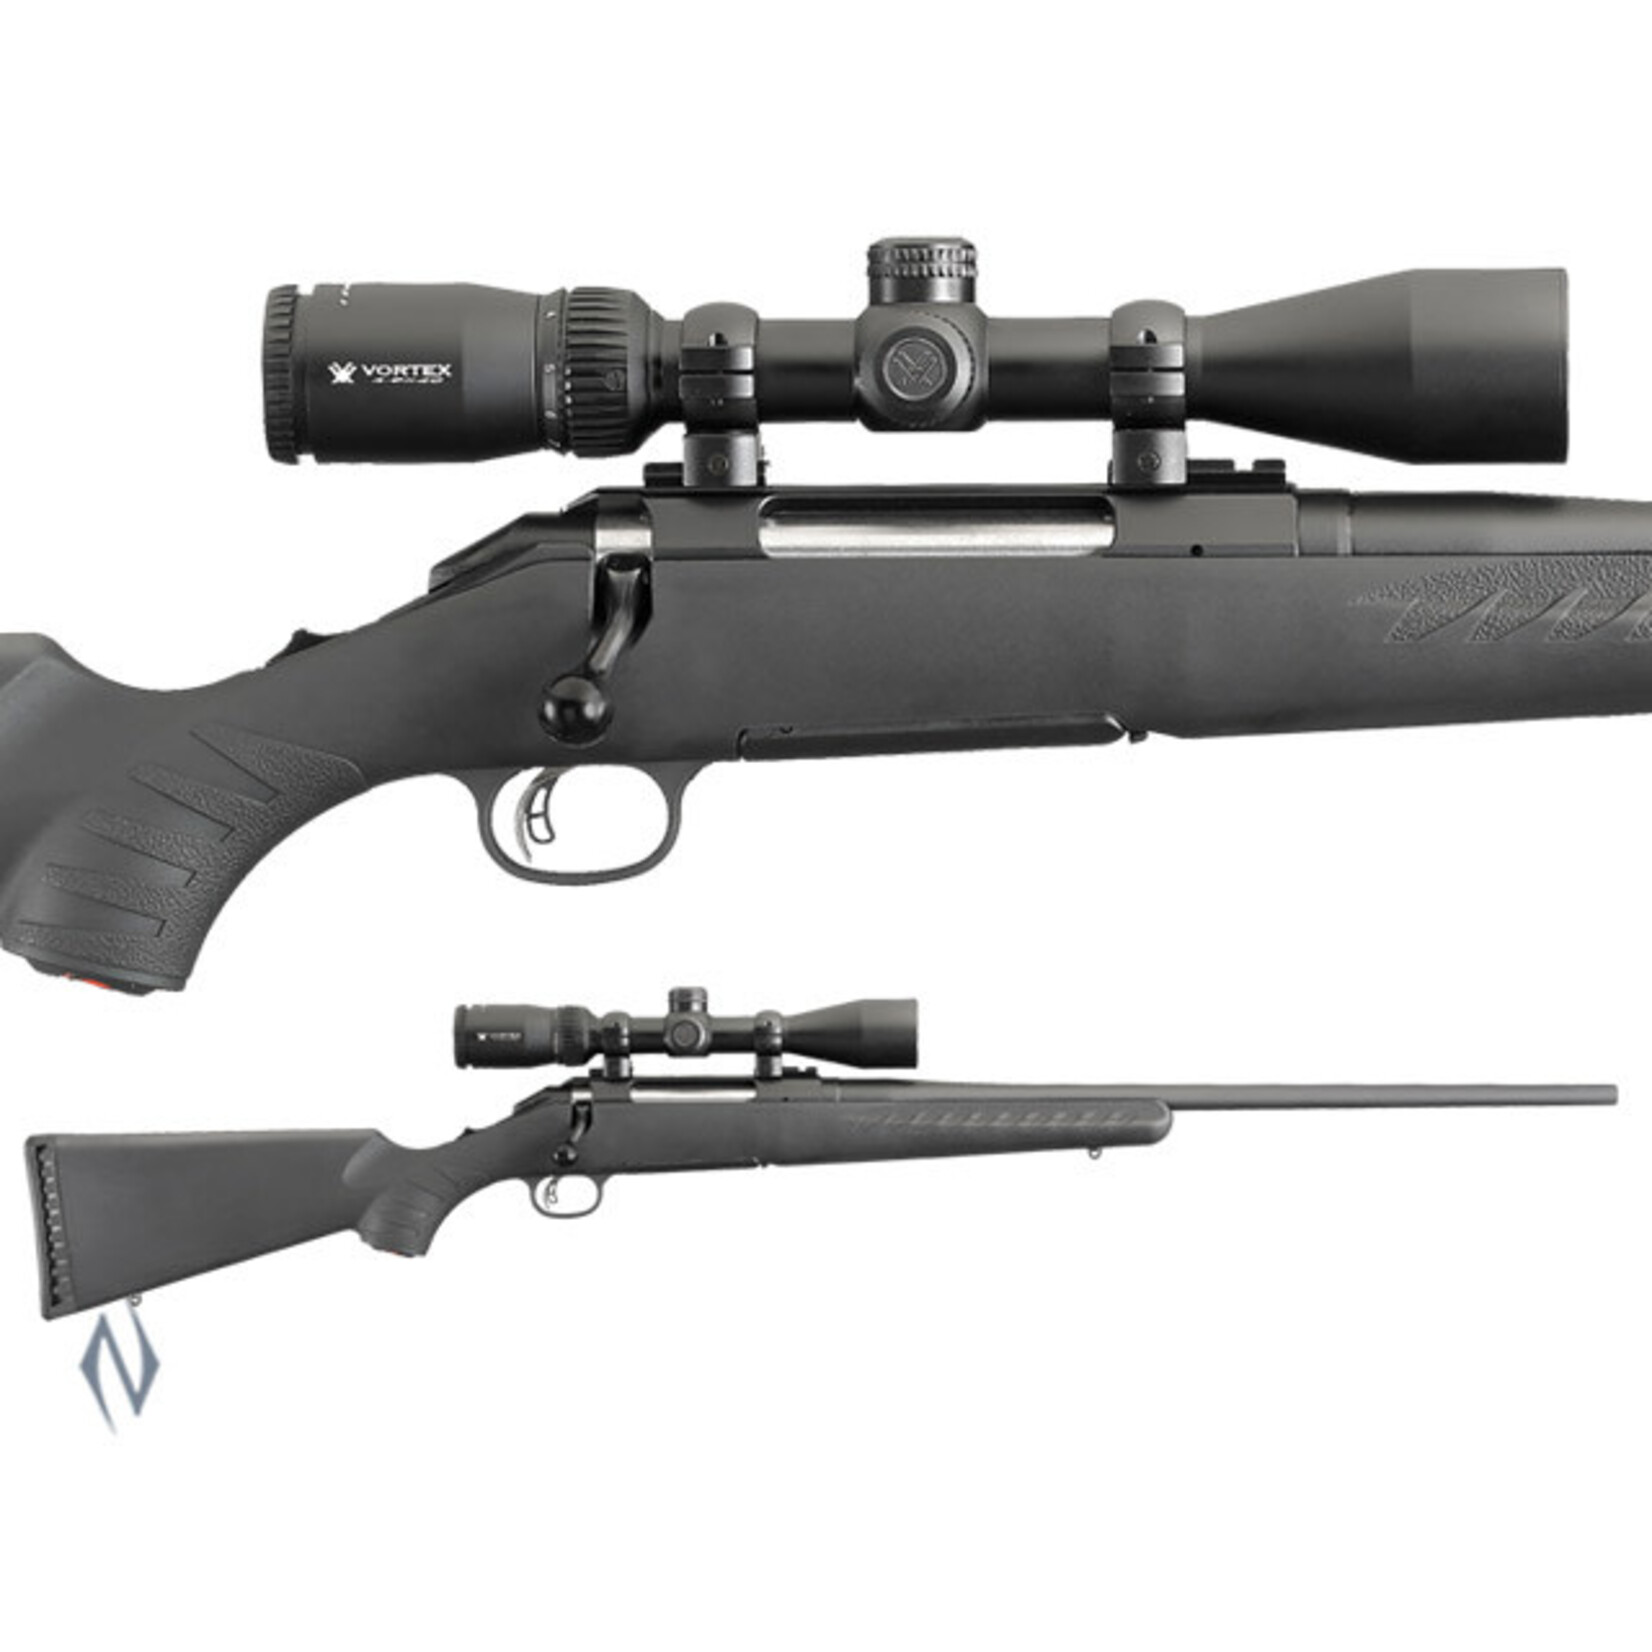 Ruger Ruger American Centrefire with Vortex 3-9x40 - 560mm bbl